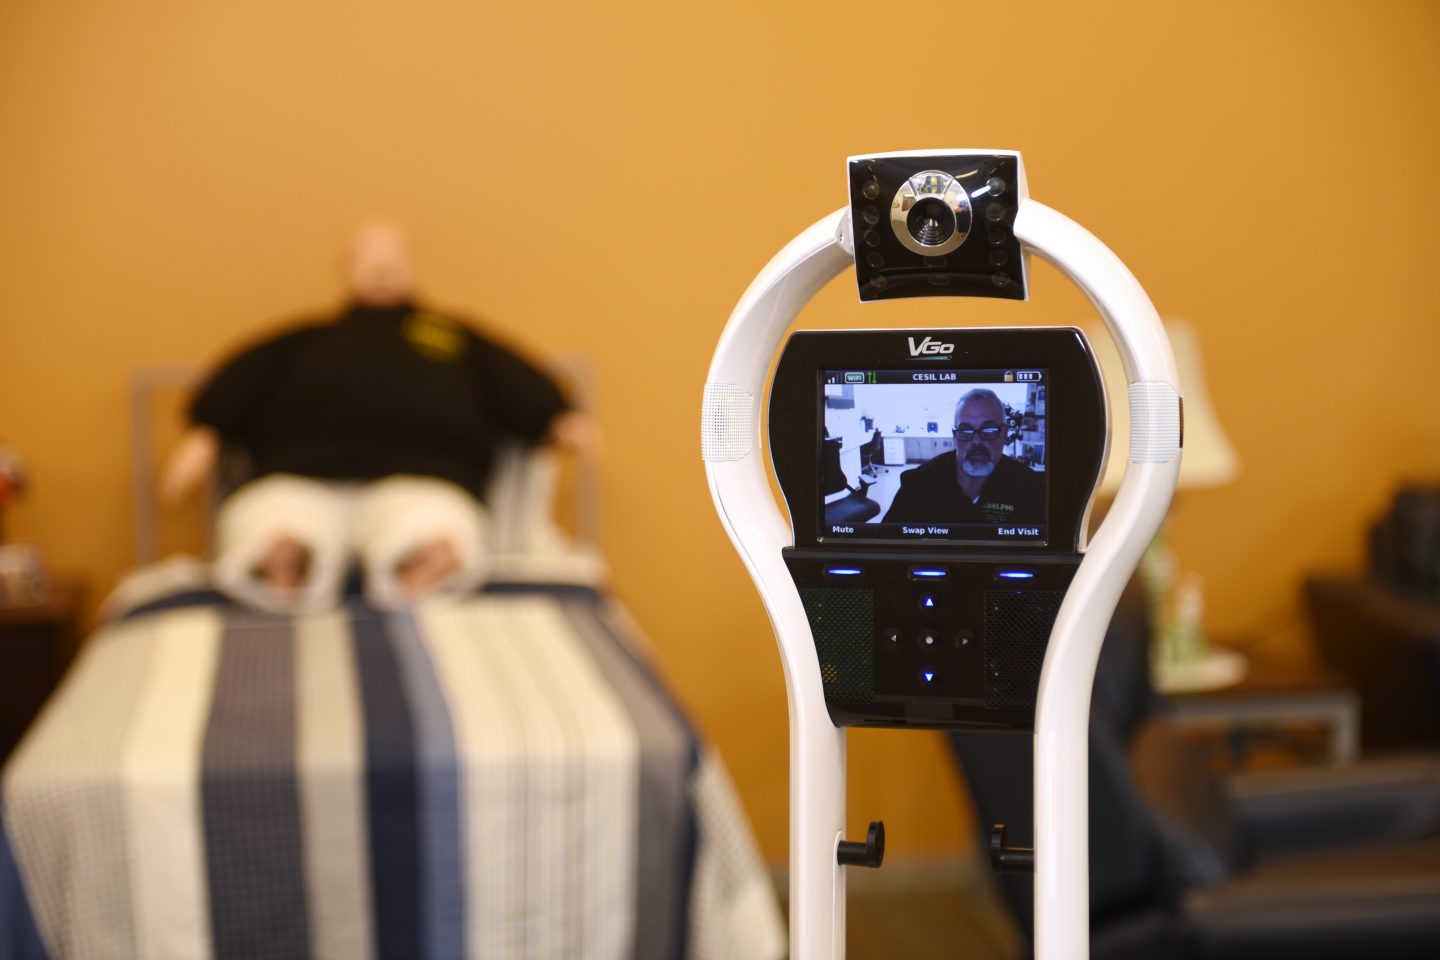 Telepresence robots like this one are used for remote monitoring in CESiL’s home-care suite as well as in the growing home healthcare field. They enhance both nursing and healthcare informatics students’ educational experience.